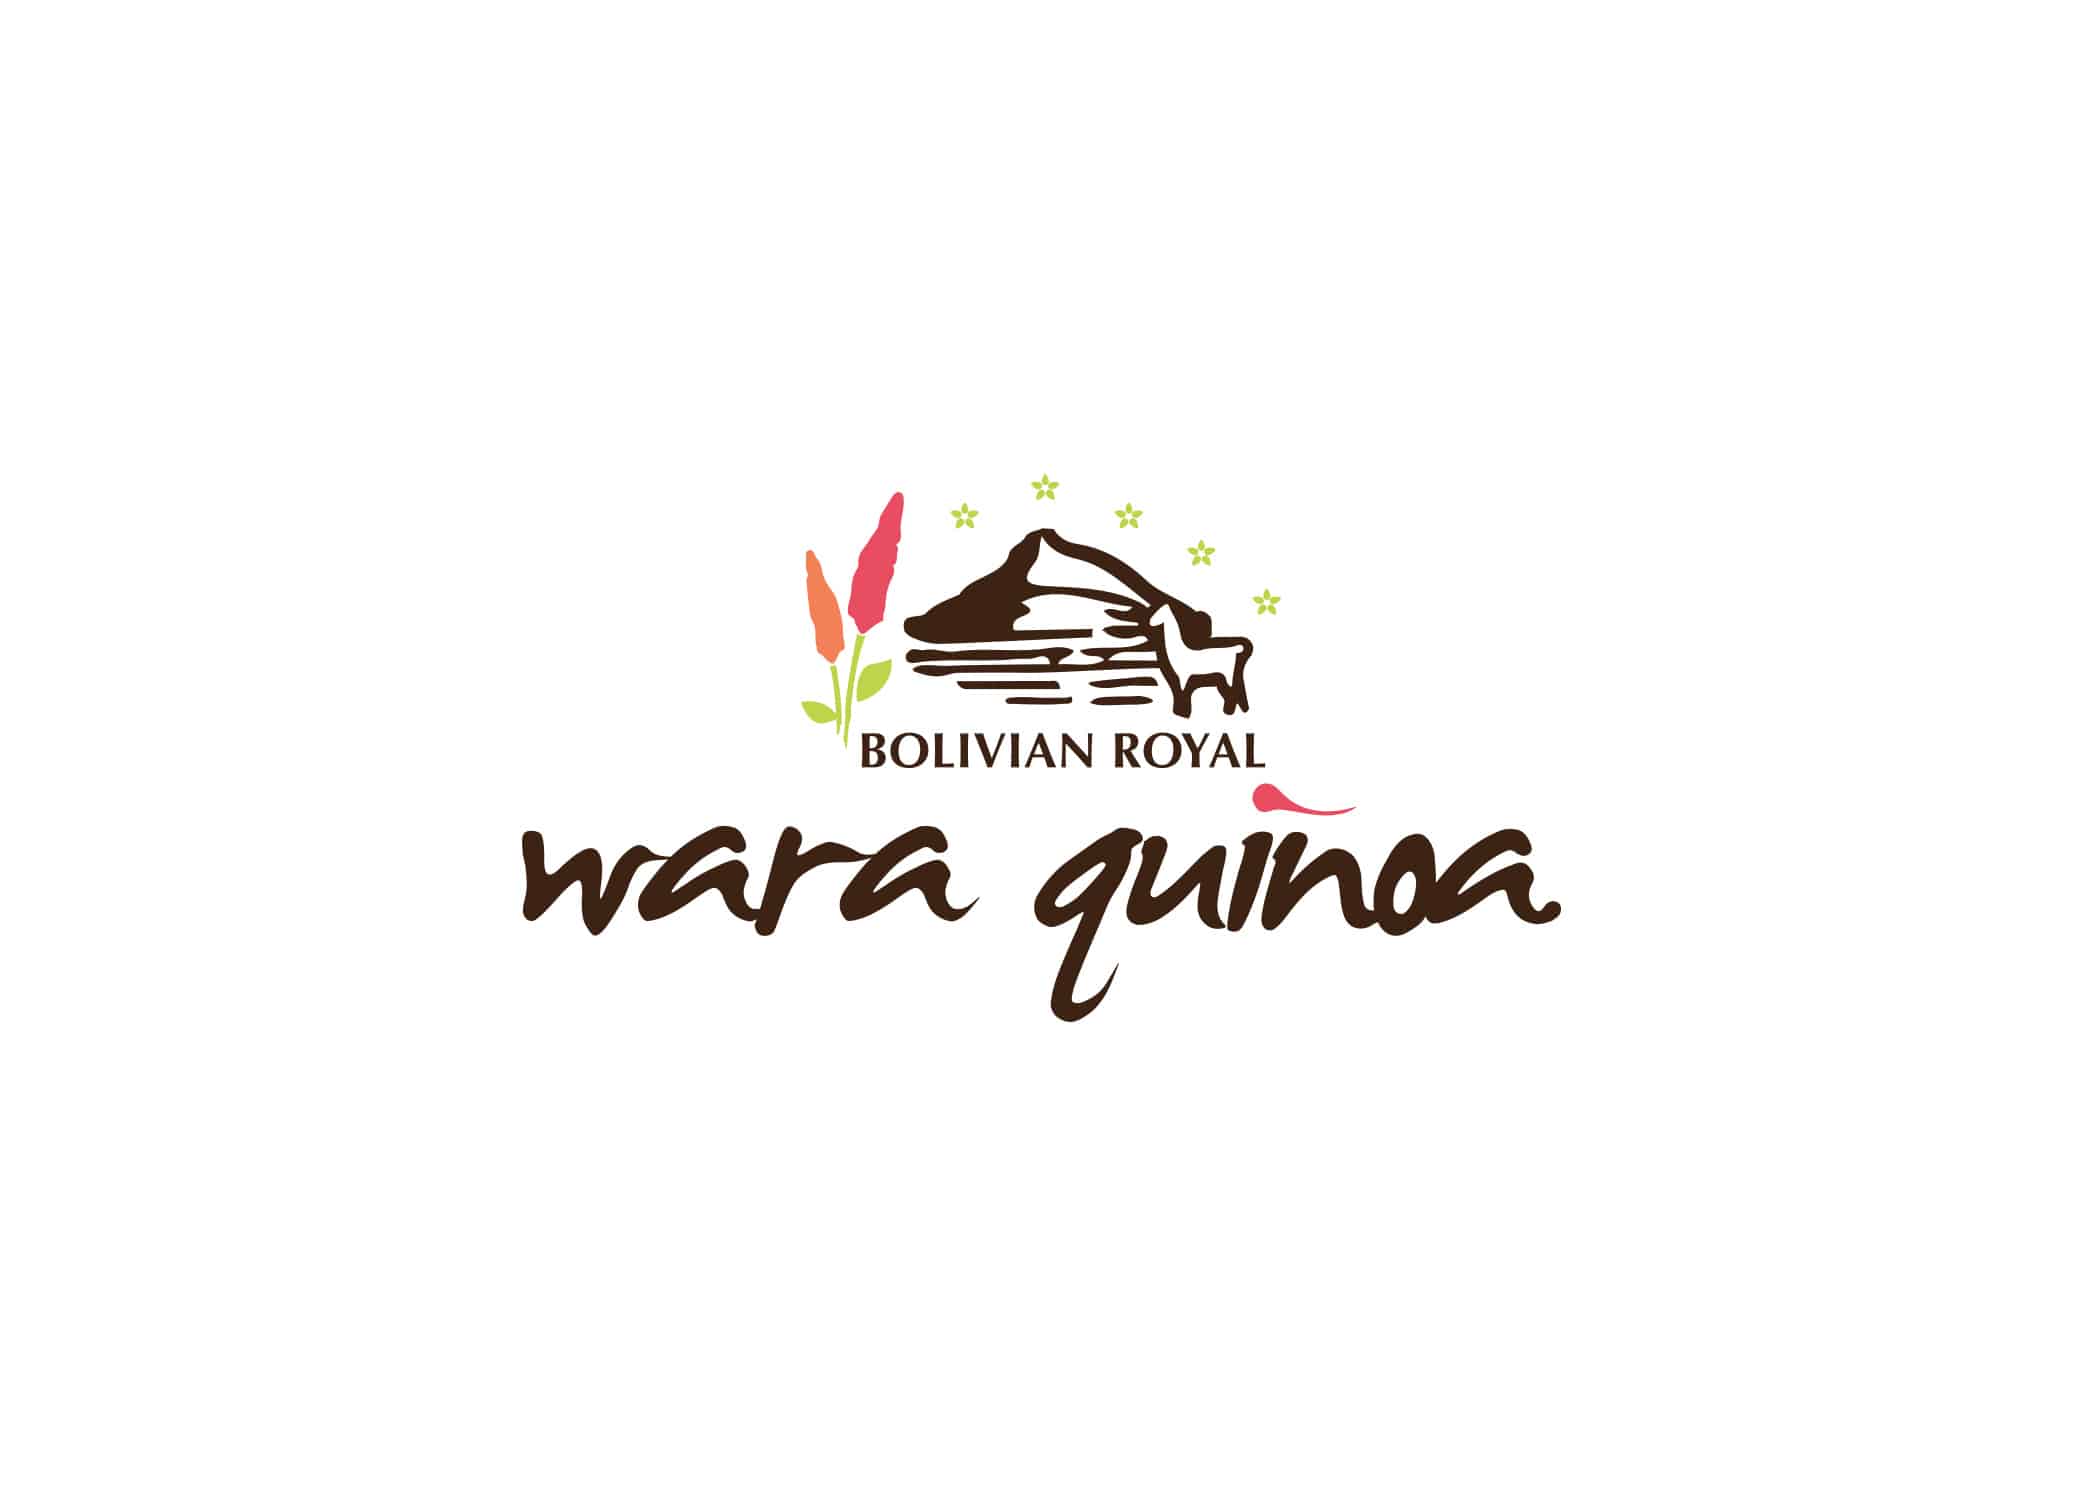 Wara Quinoa logo design with the valley and llama icons and brown, pink and green color palette.